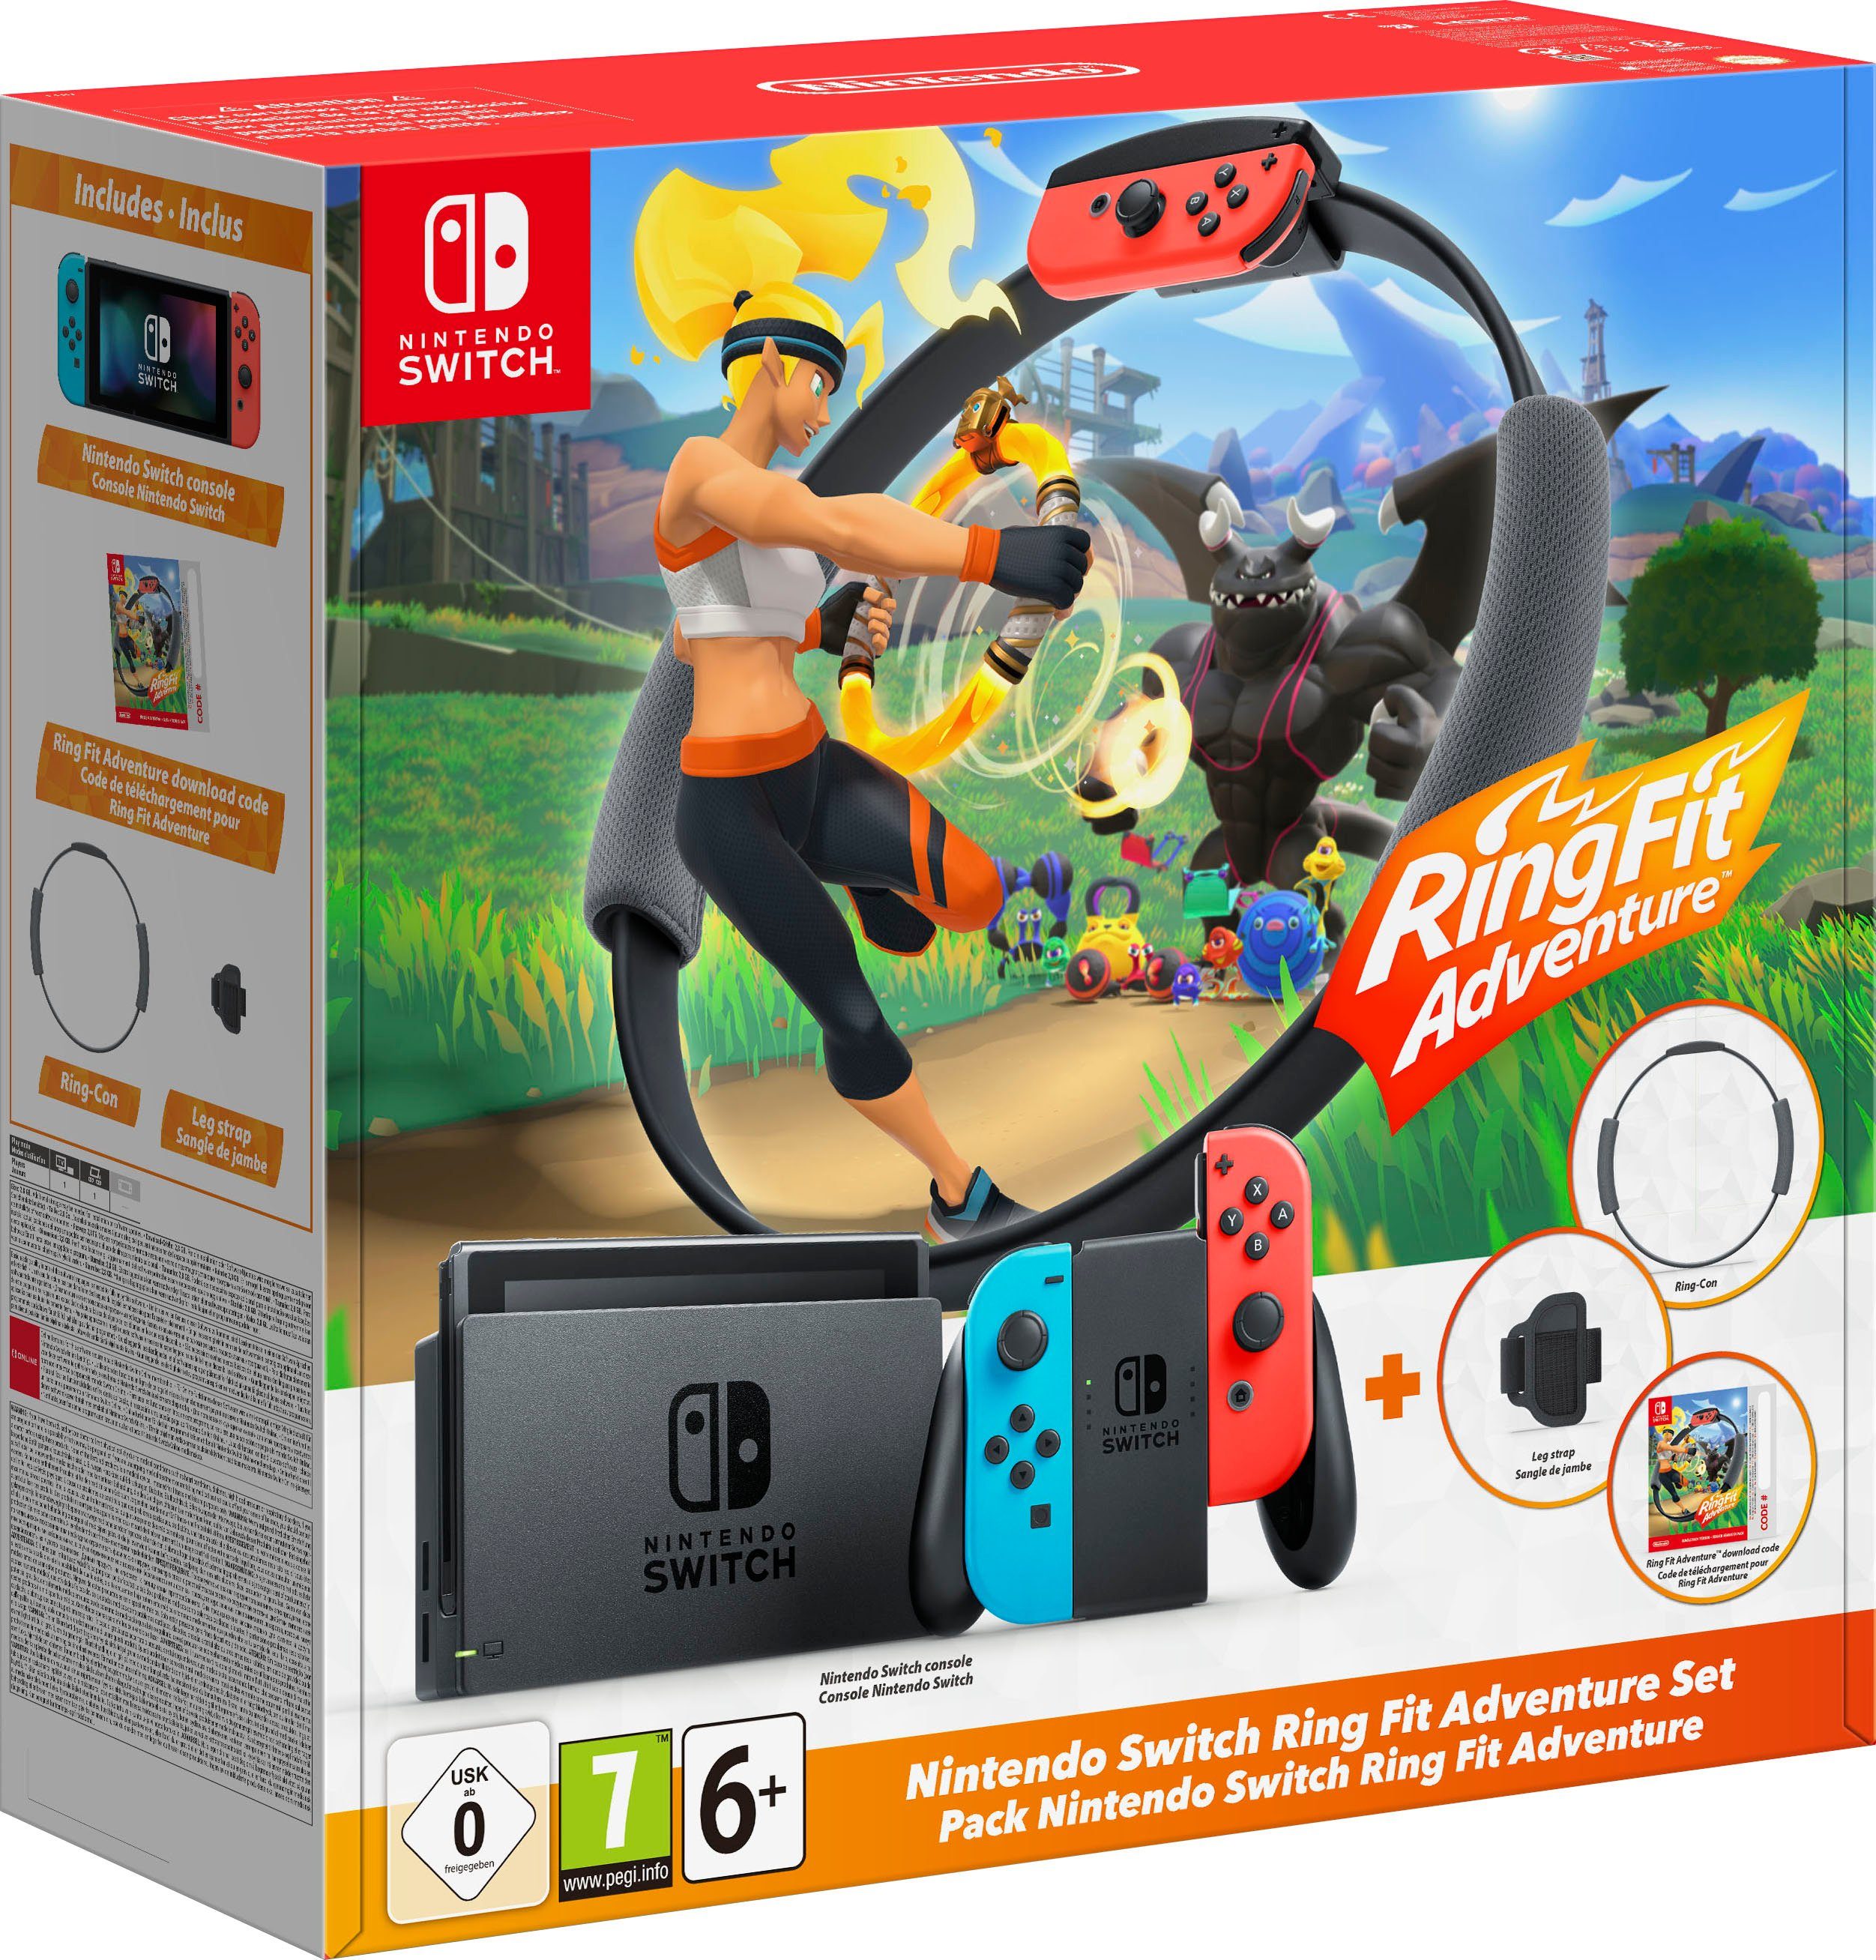 Nintendo Switch inkl. Ring Fit Adventure